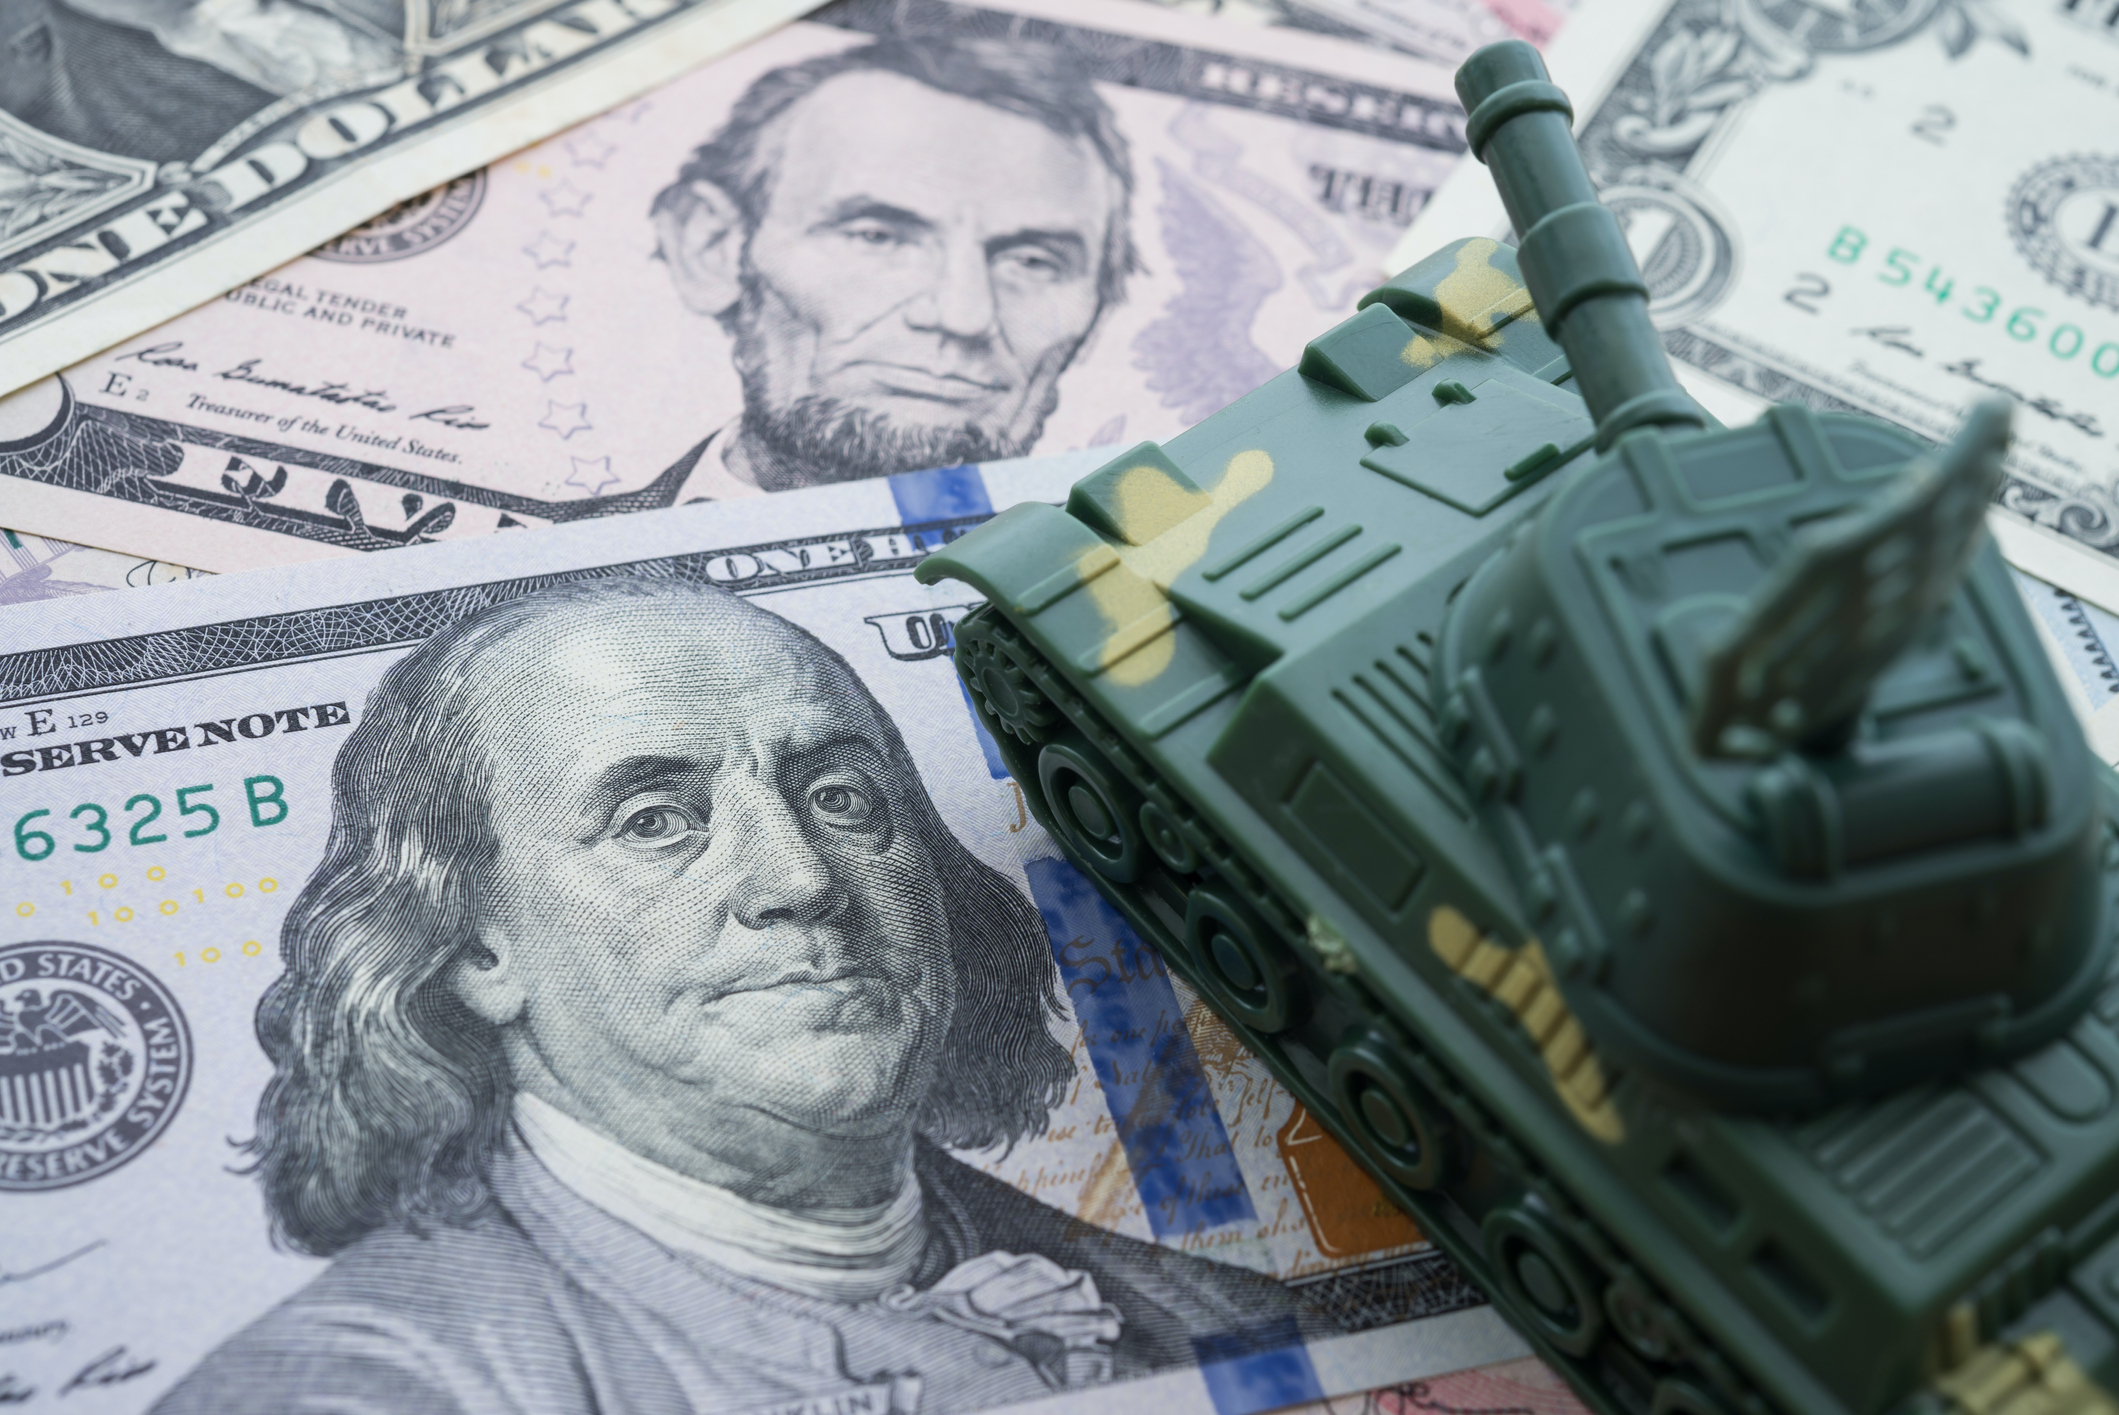 toy tank on top of money